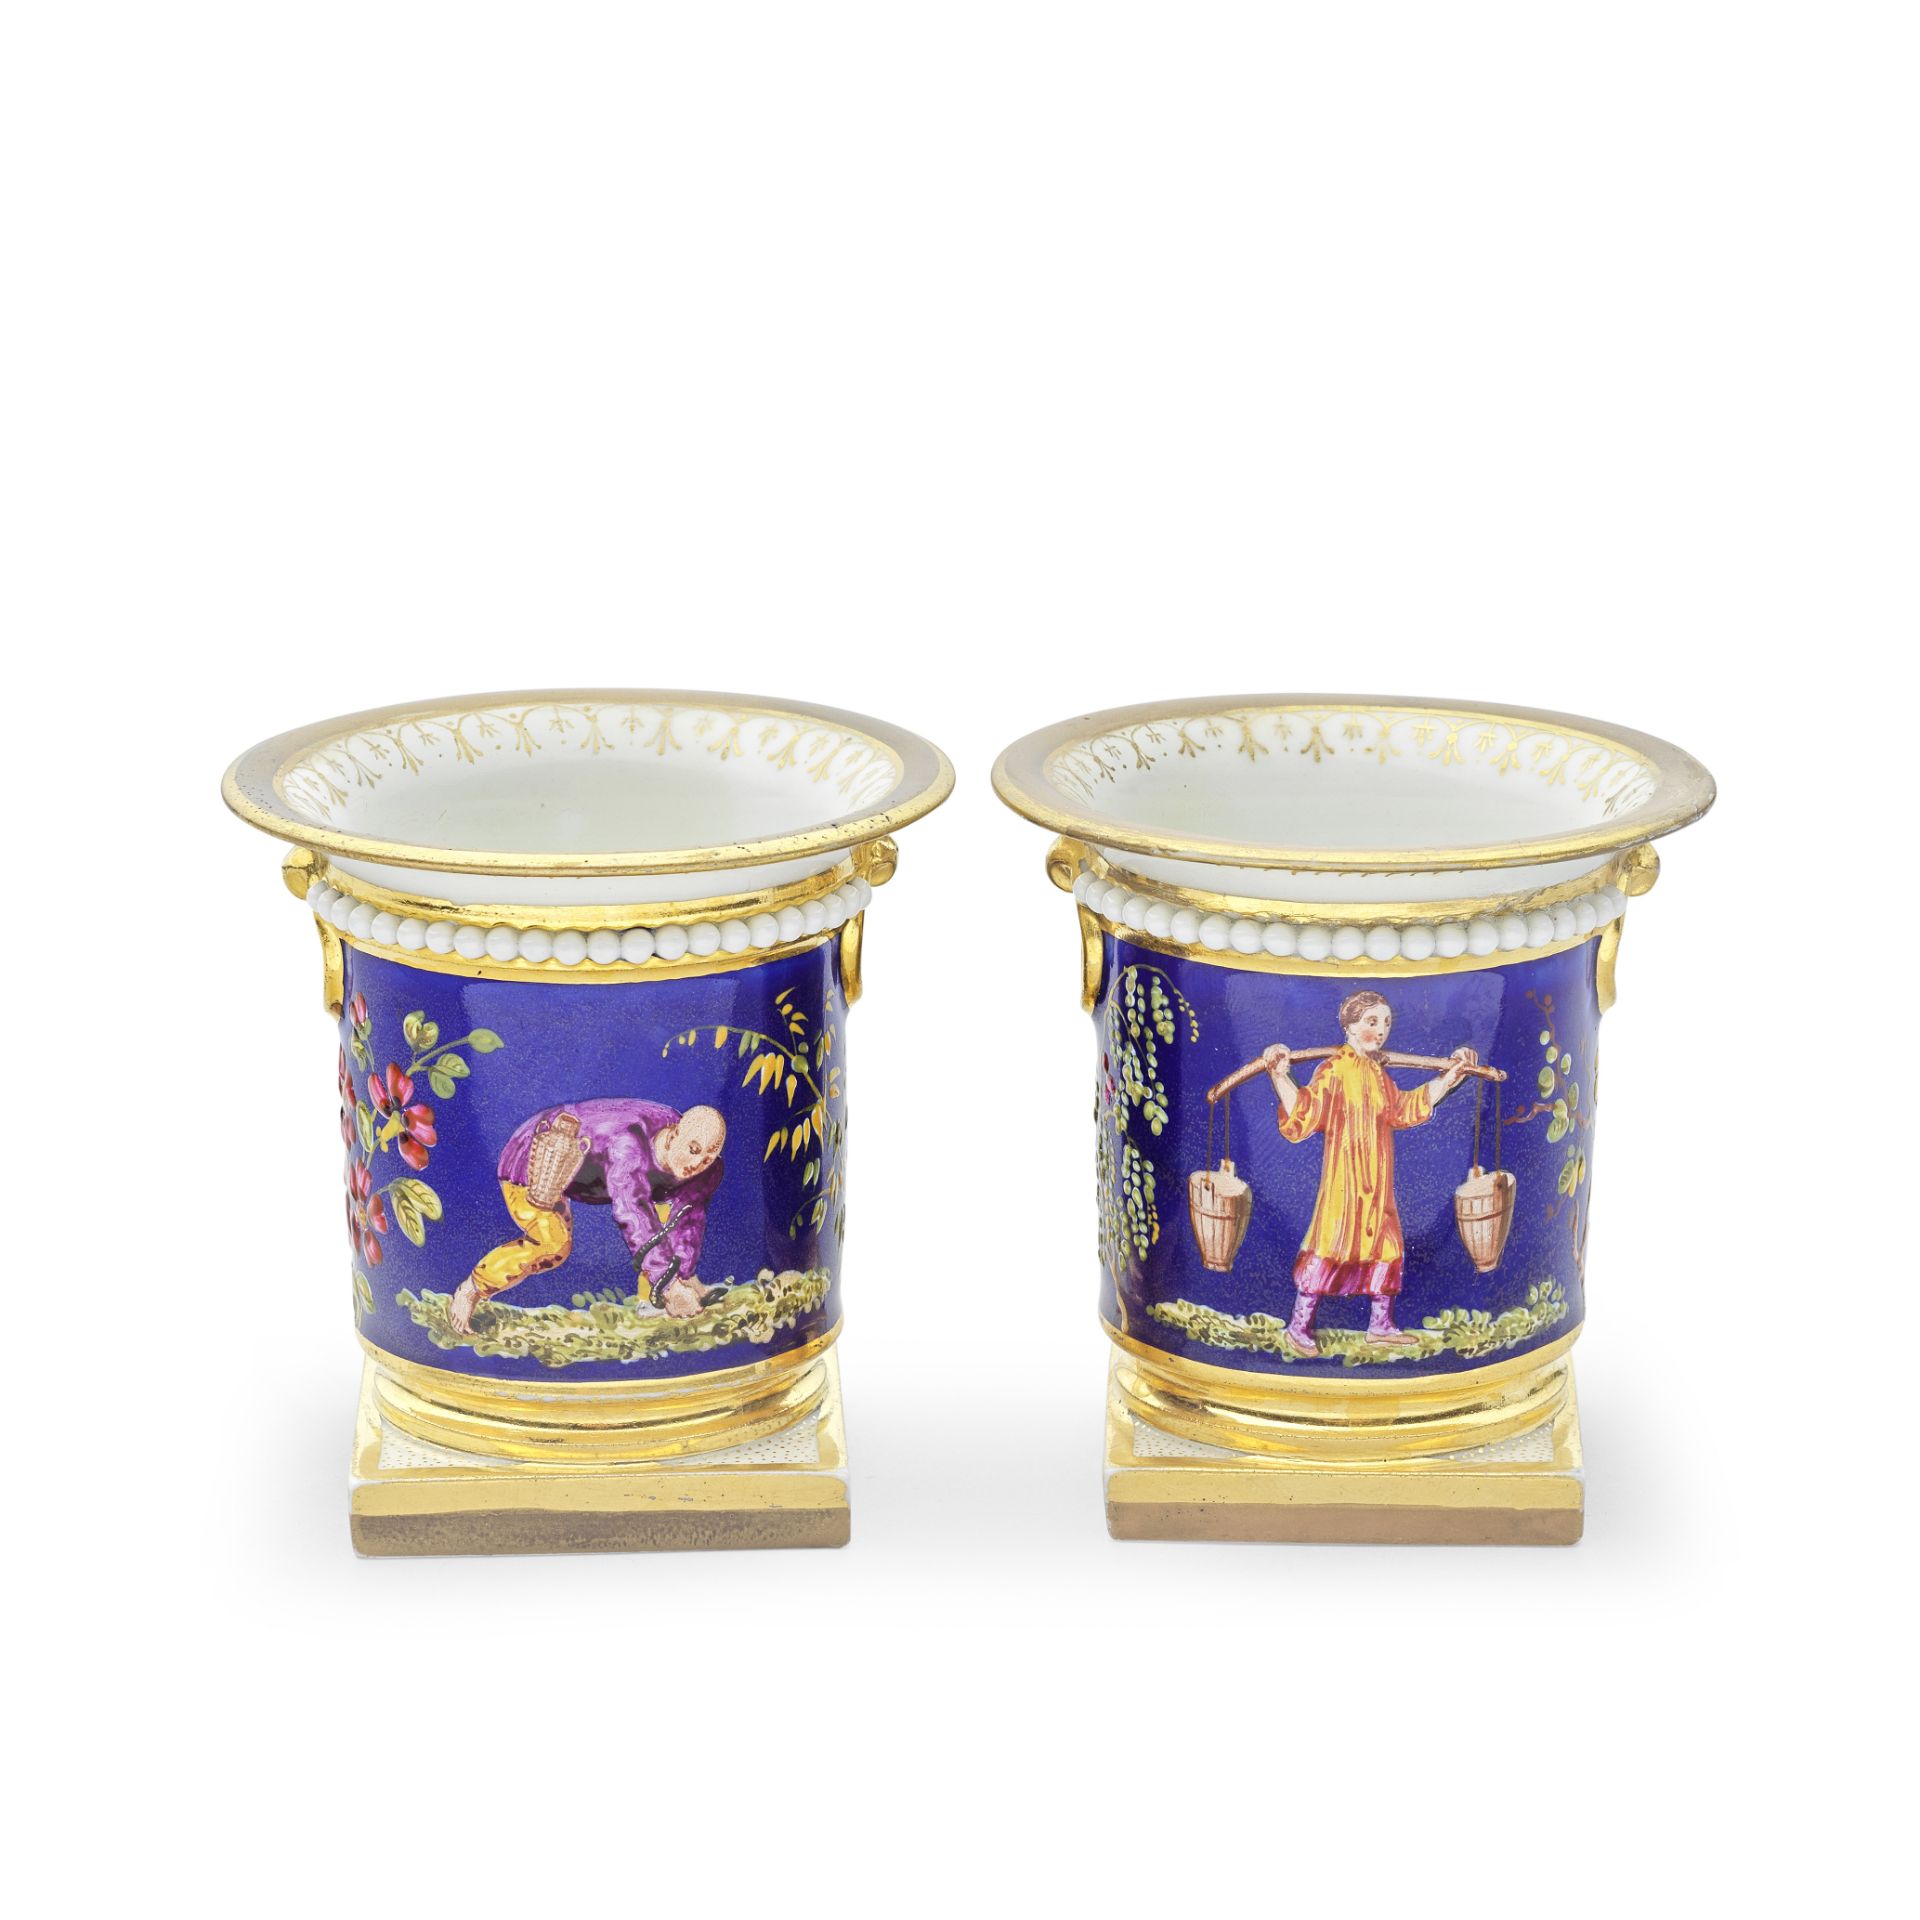 A pair of unusual Flight, Barr and Barr Worcester spill vases, circa 1825